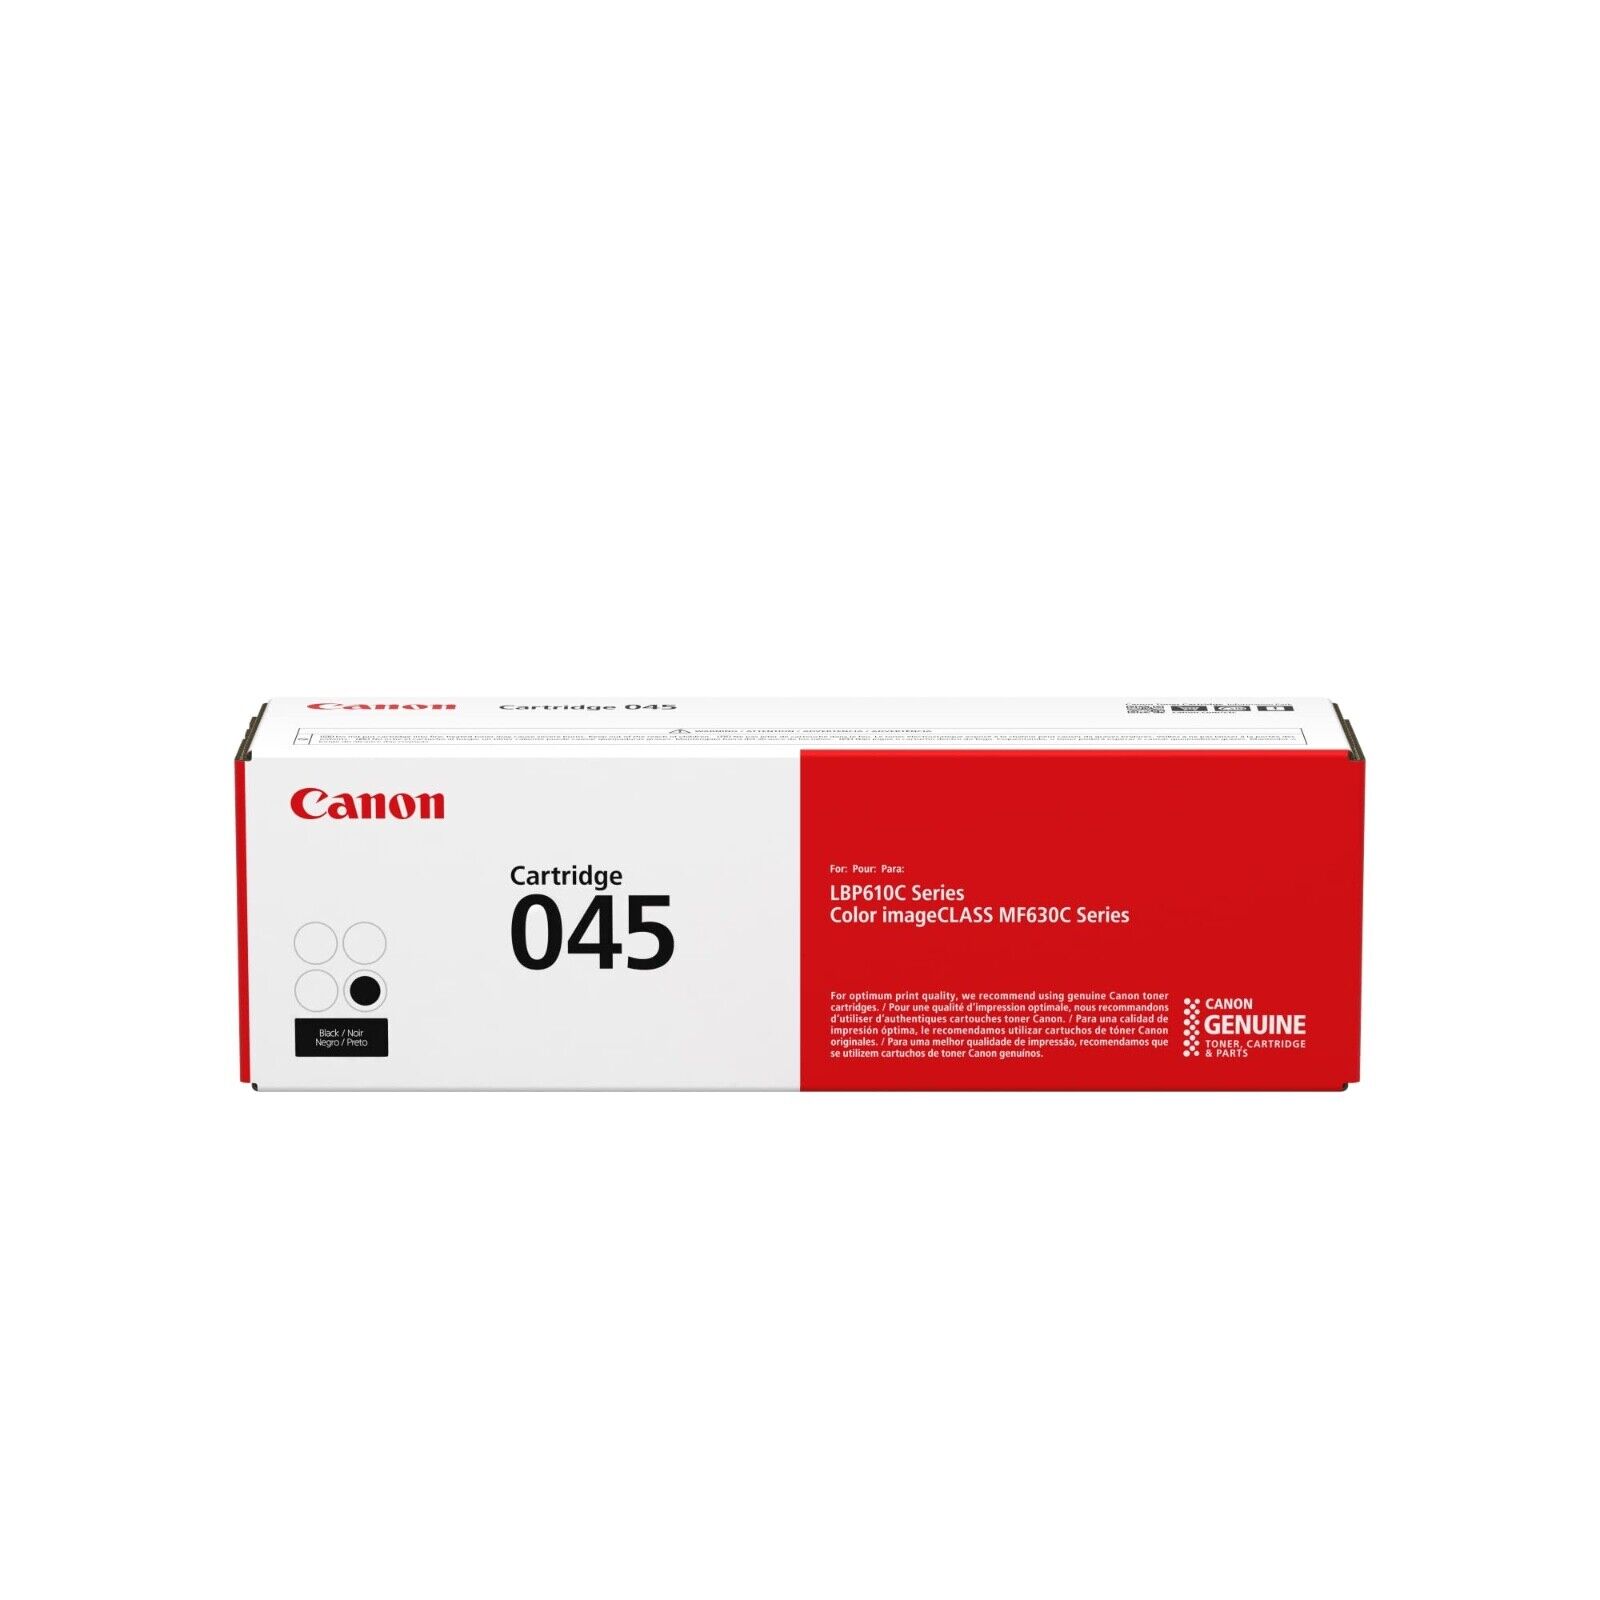 Canon 045 H Toner Cartridge - Black Genuine Canon with Box opened for inspection